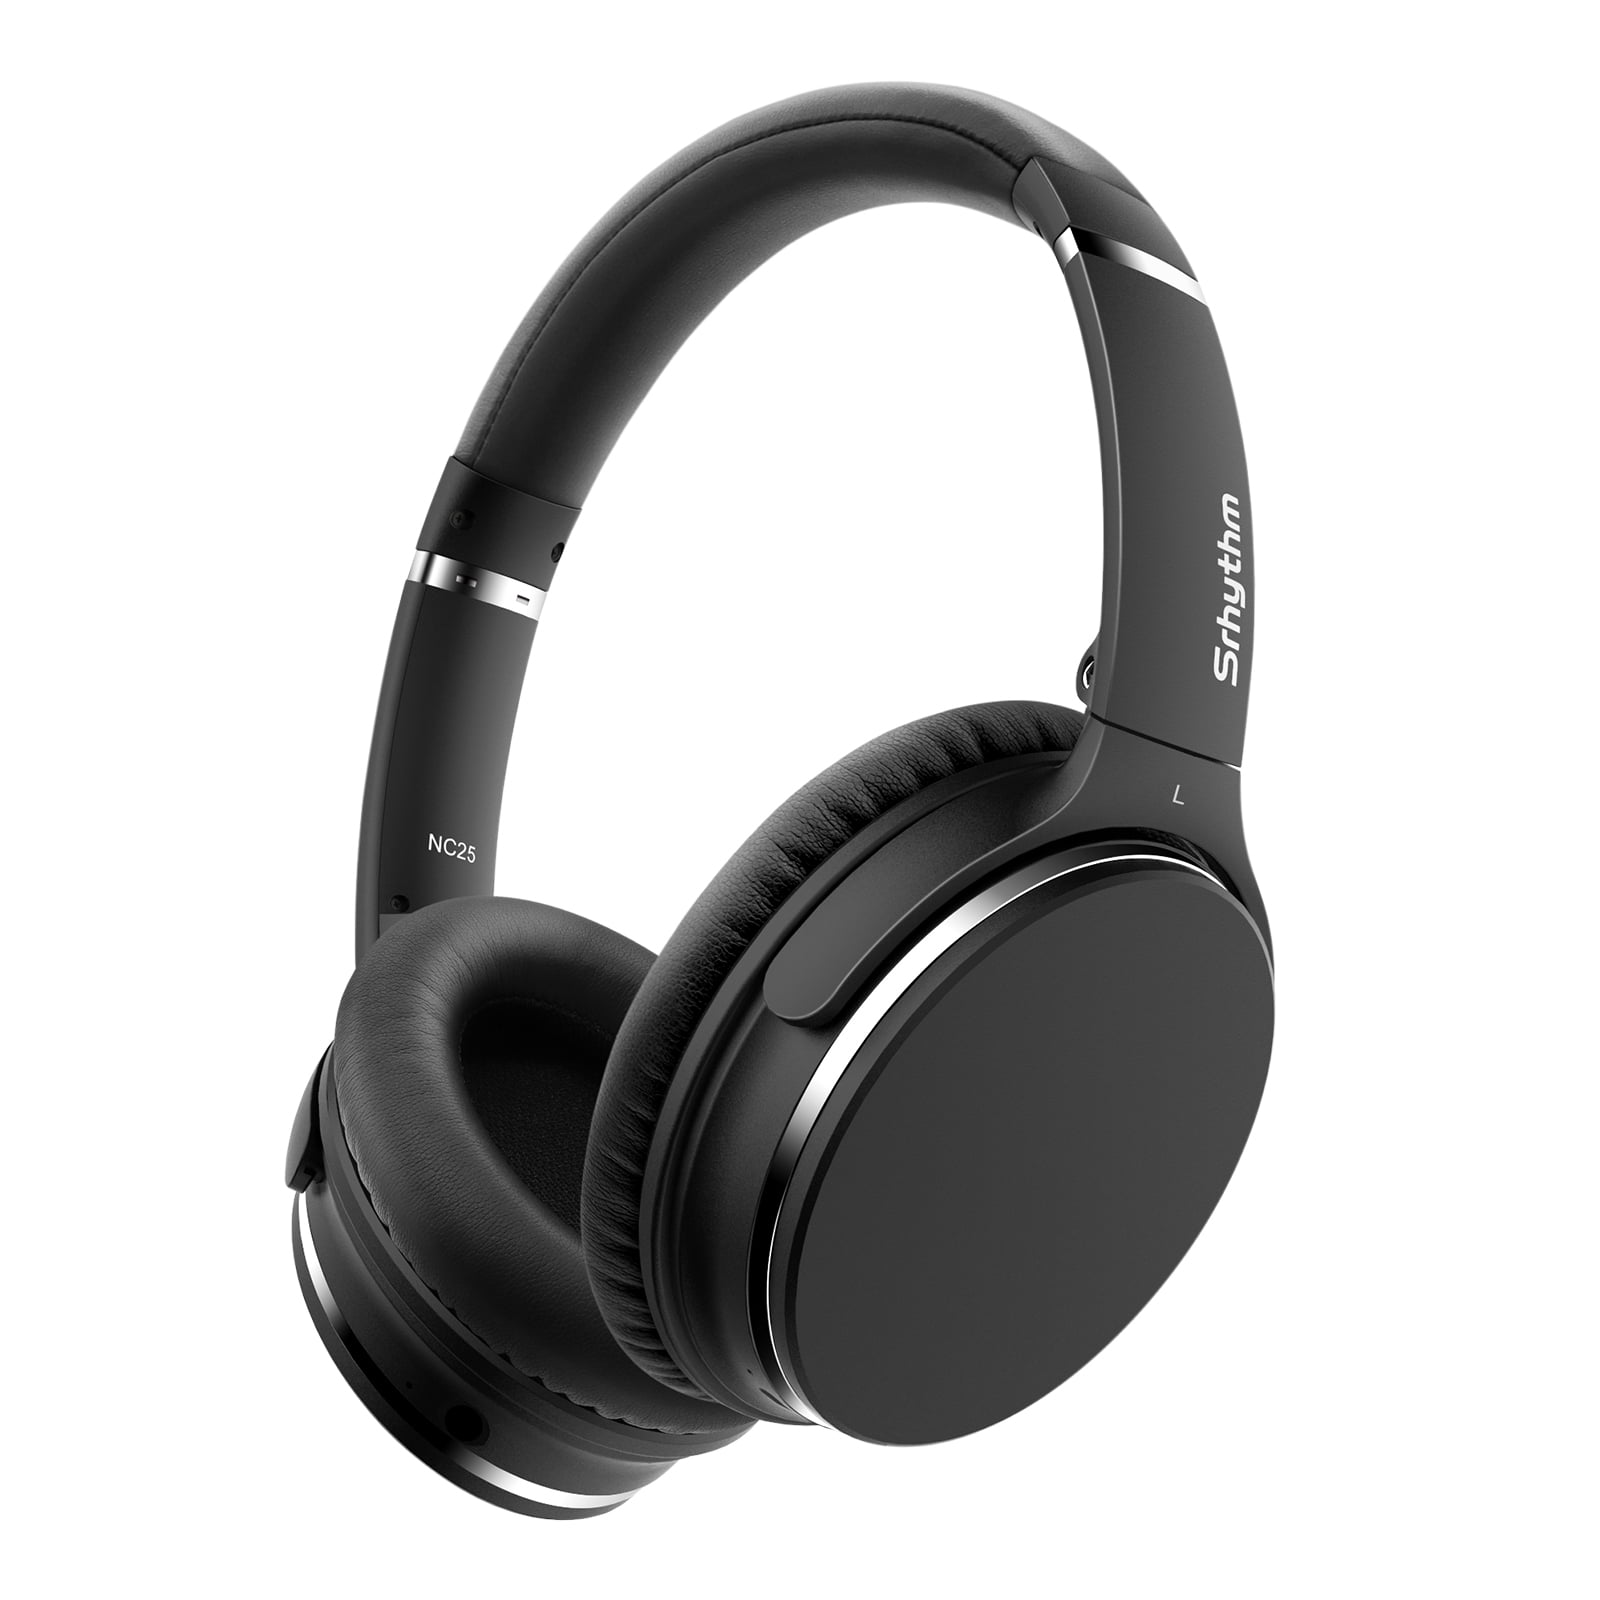 Srhythm NC25 Active Noise Cancelling Headphones Bluetooth 5.3,ANC Stereo  Headset over-Ear with Hi-Fi,Mic,50H Playtime,Voice Assistant,Low Latency  Game Mode 